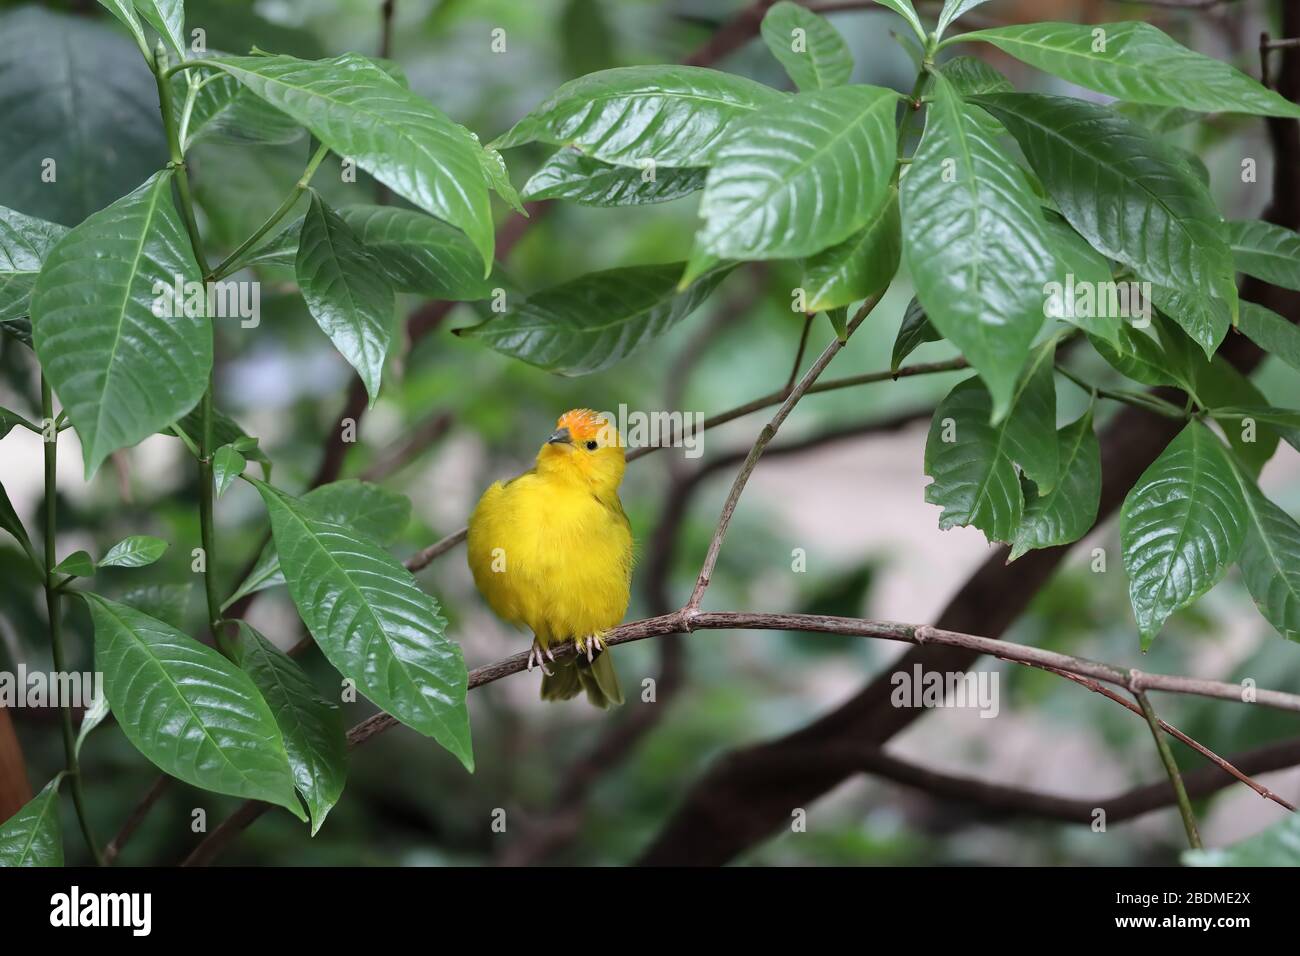 Close up of a yellow song bird sitting on a branch in a tropical tree. Stock Photo